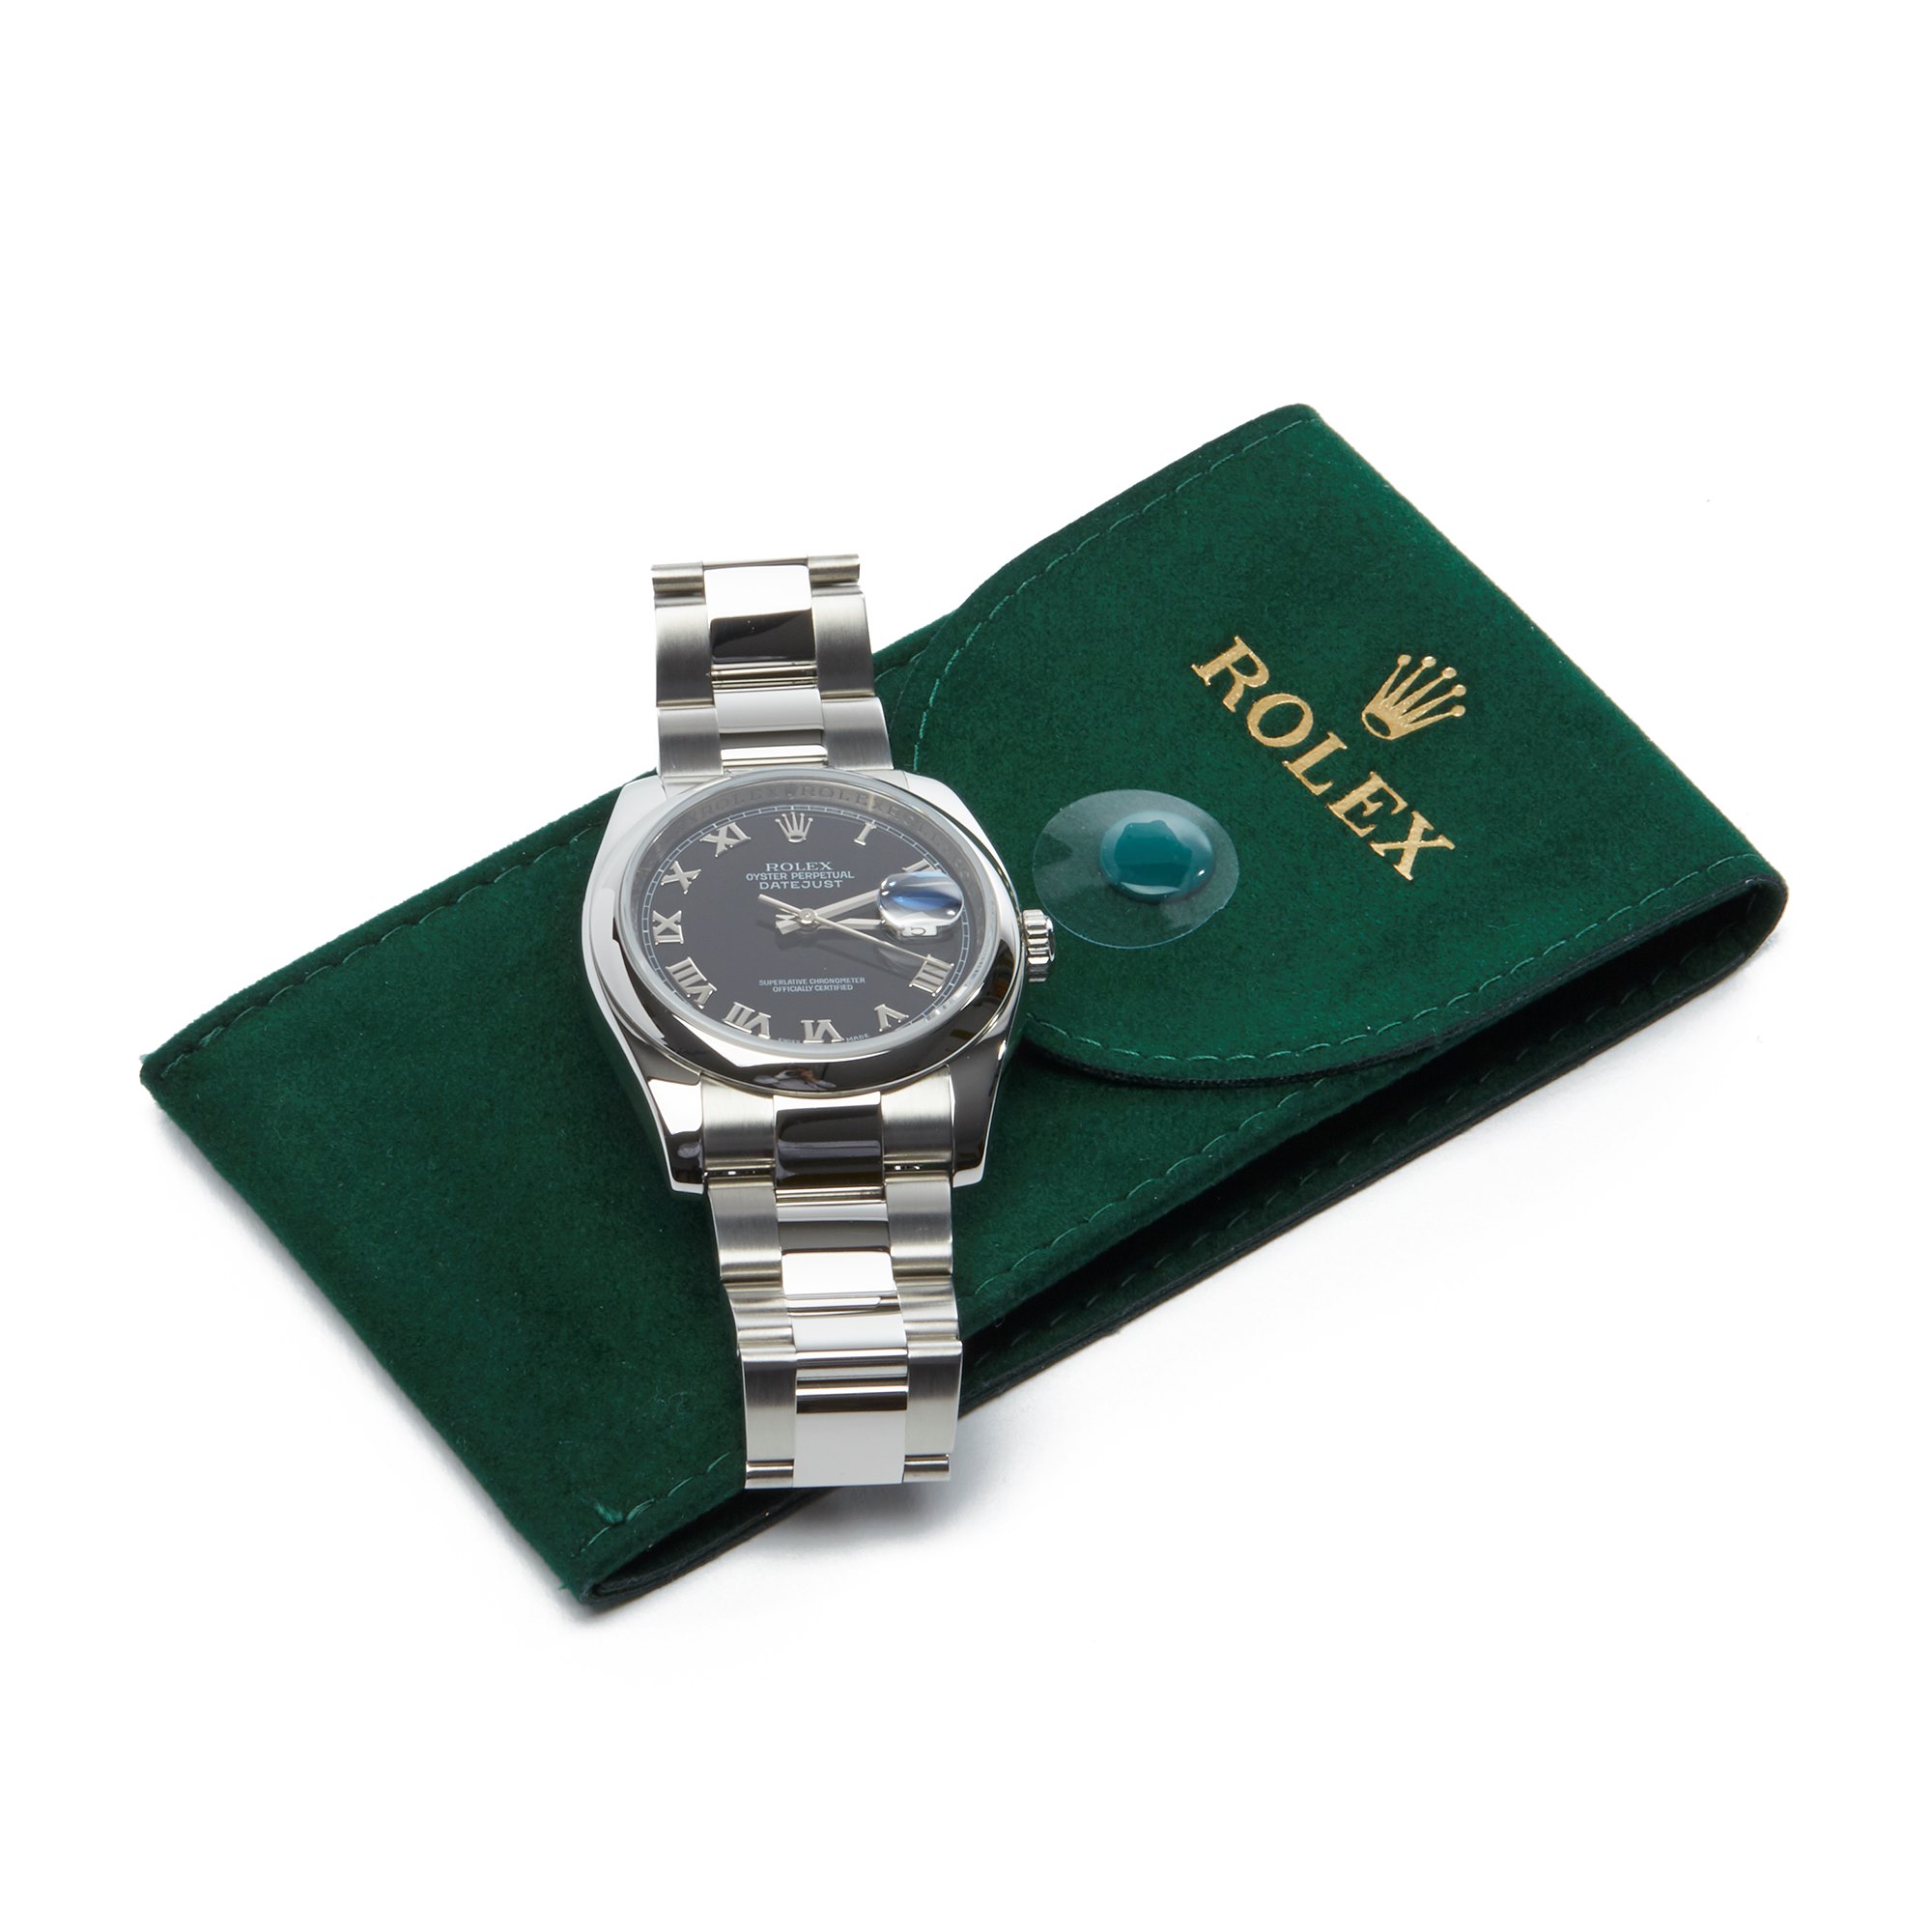 Rolex Datejust 36 Stainless Steel Watch 116200 - Image 8 of 9